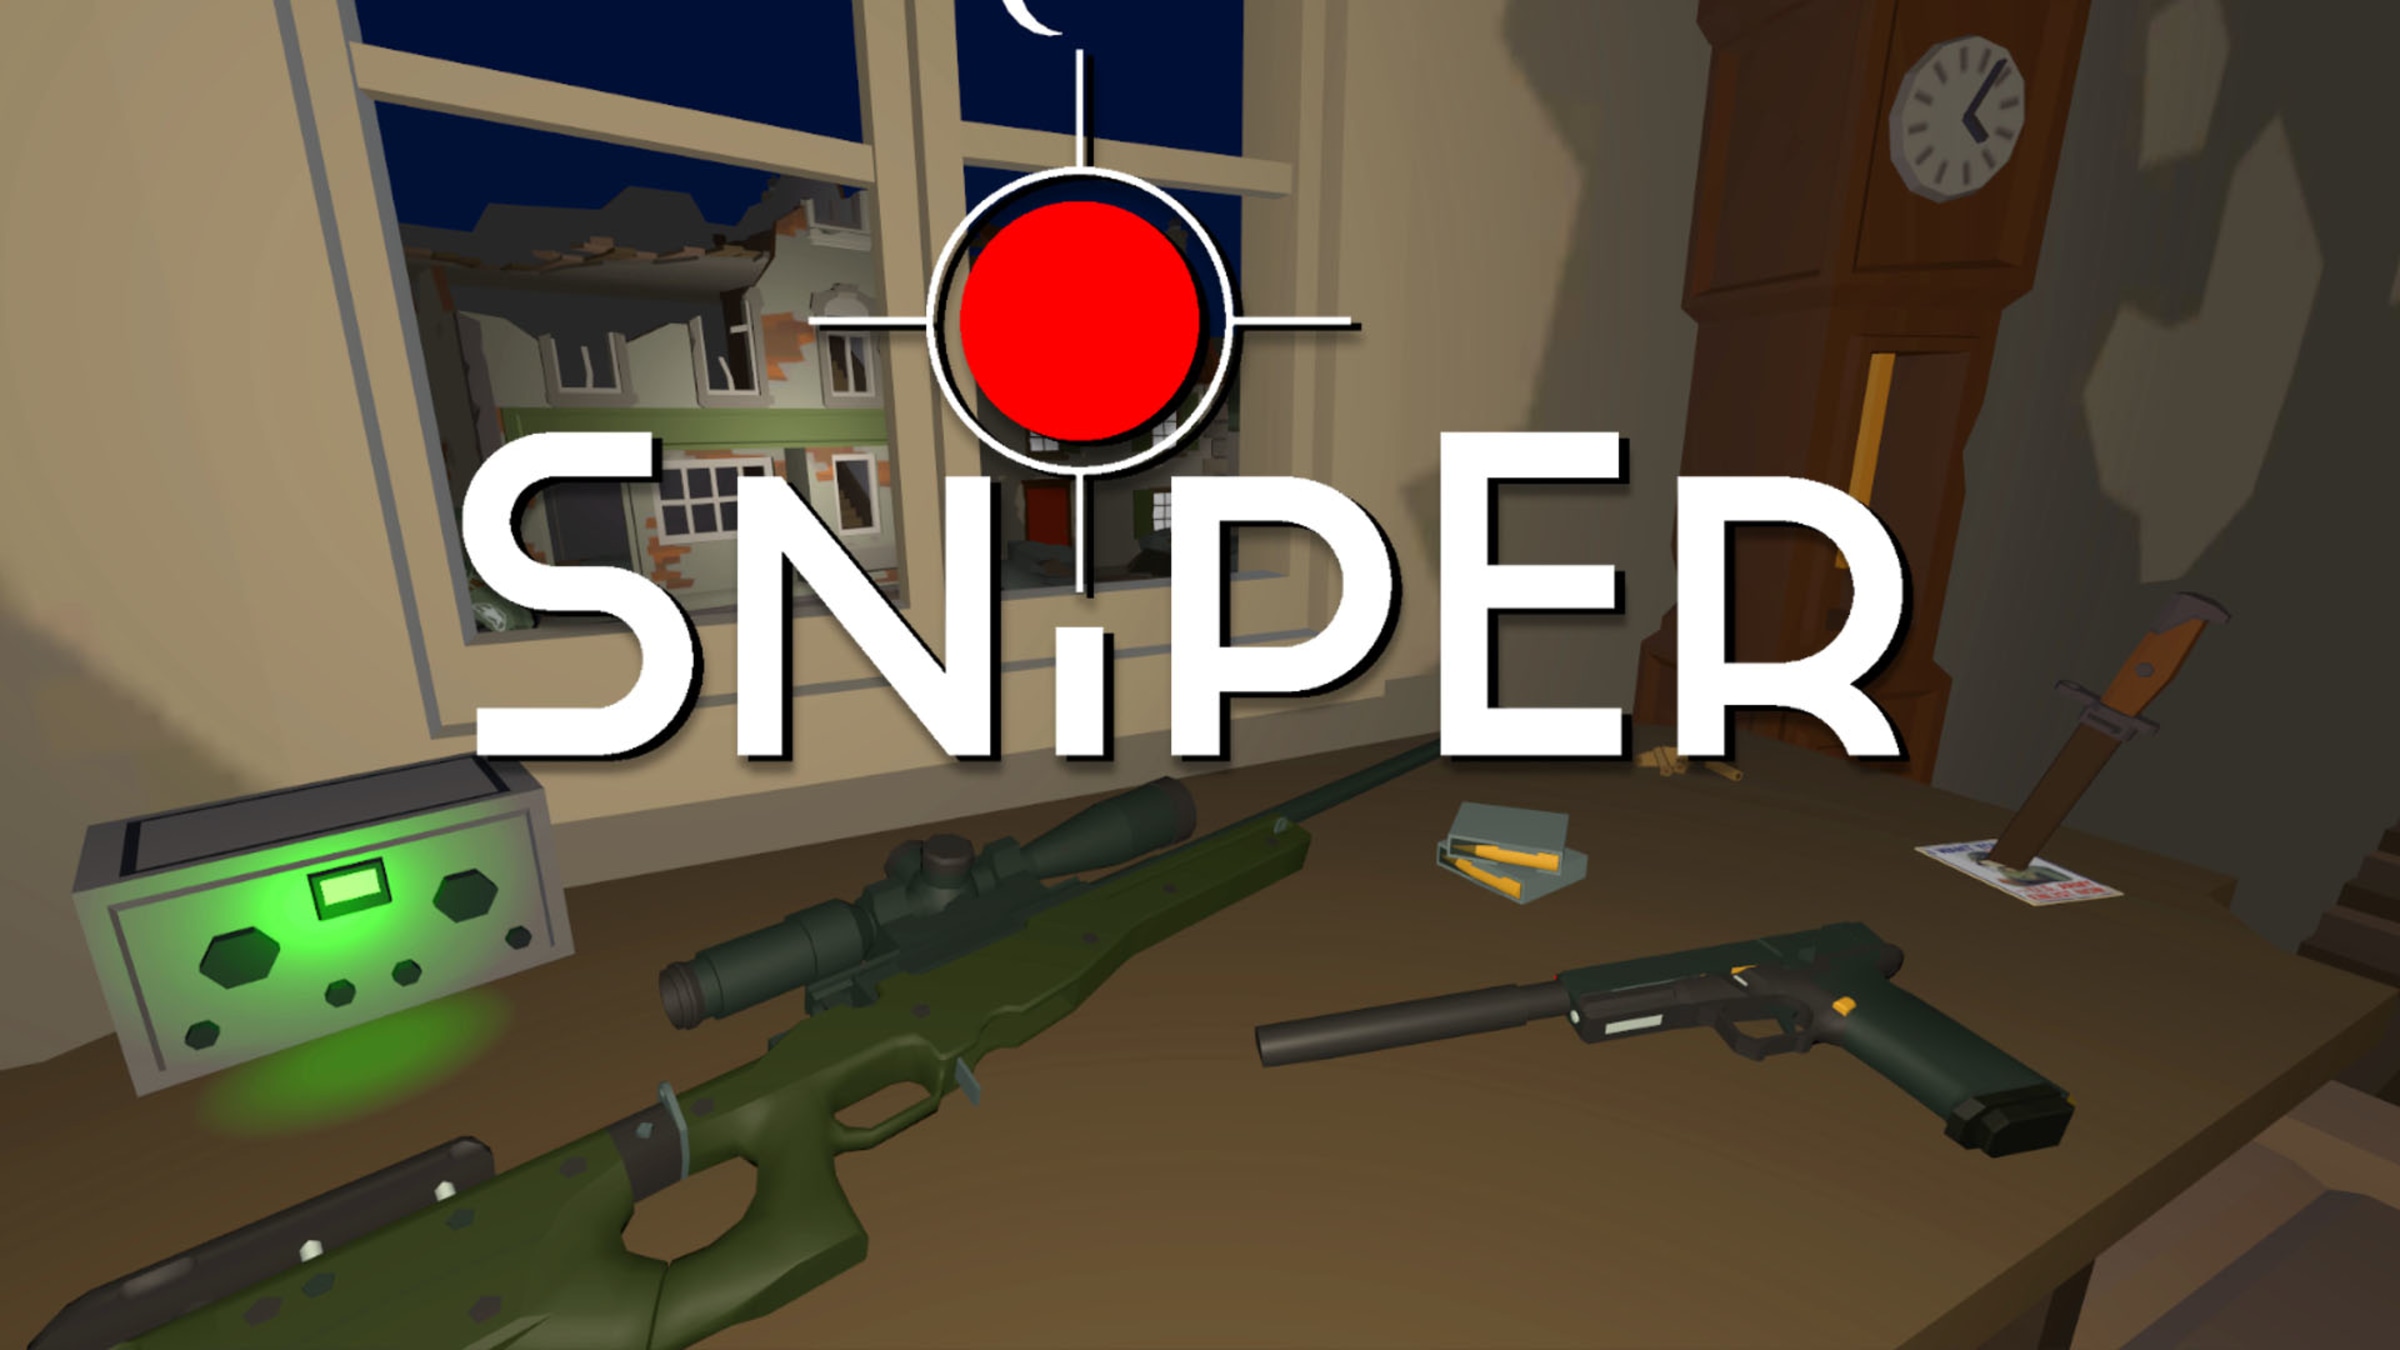 Sniper for Nintendo Switch